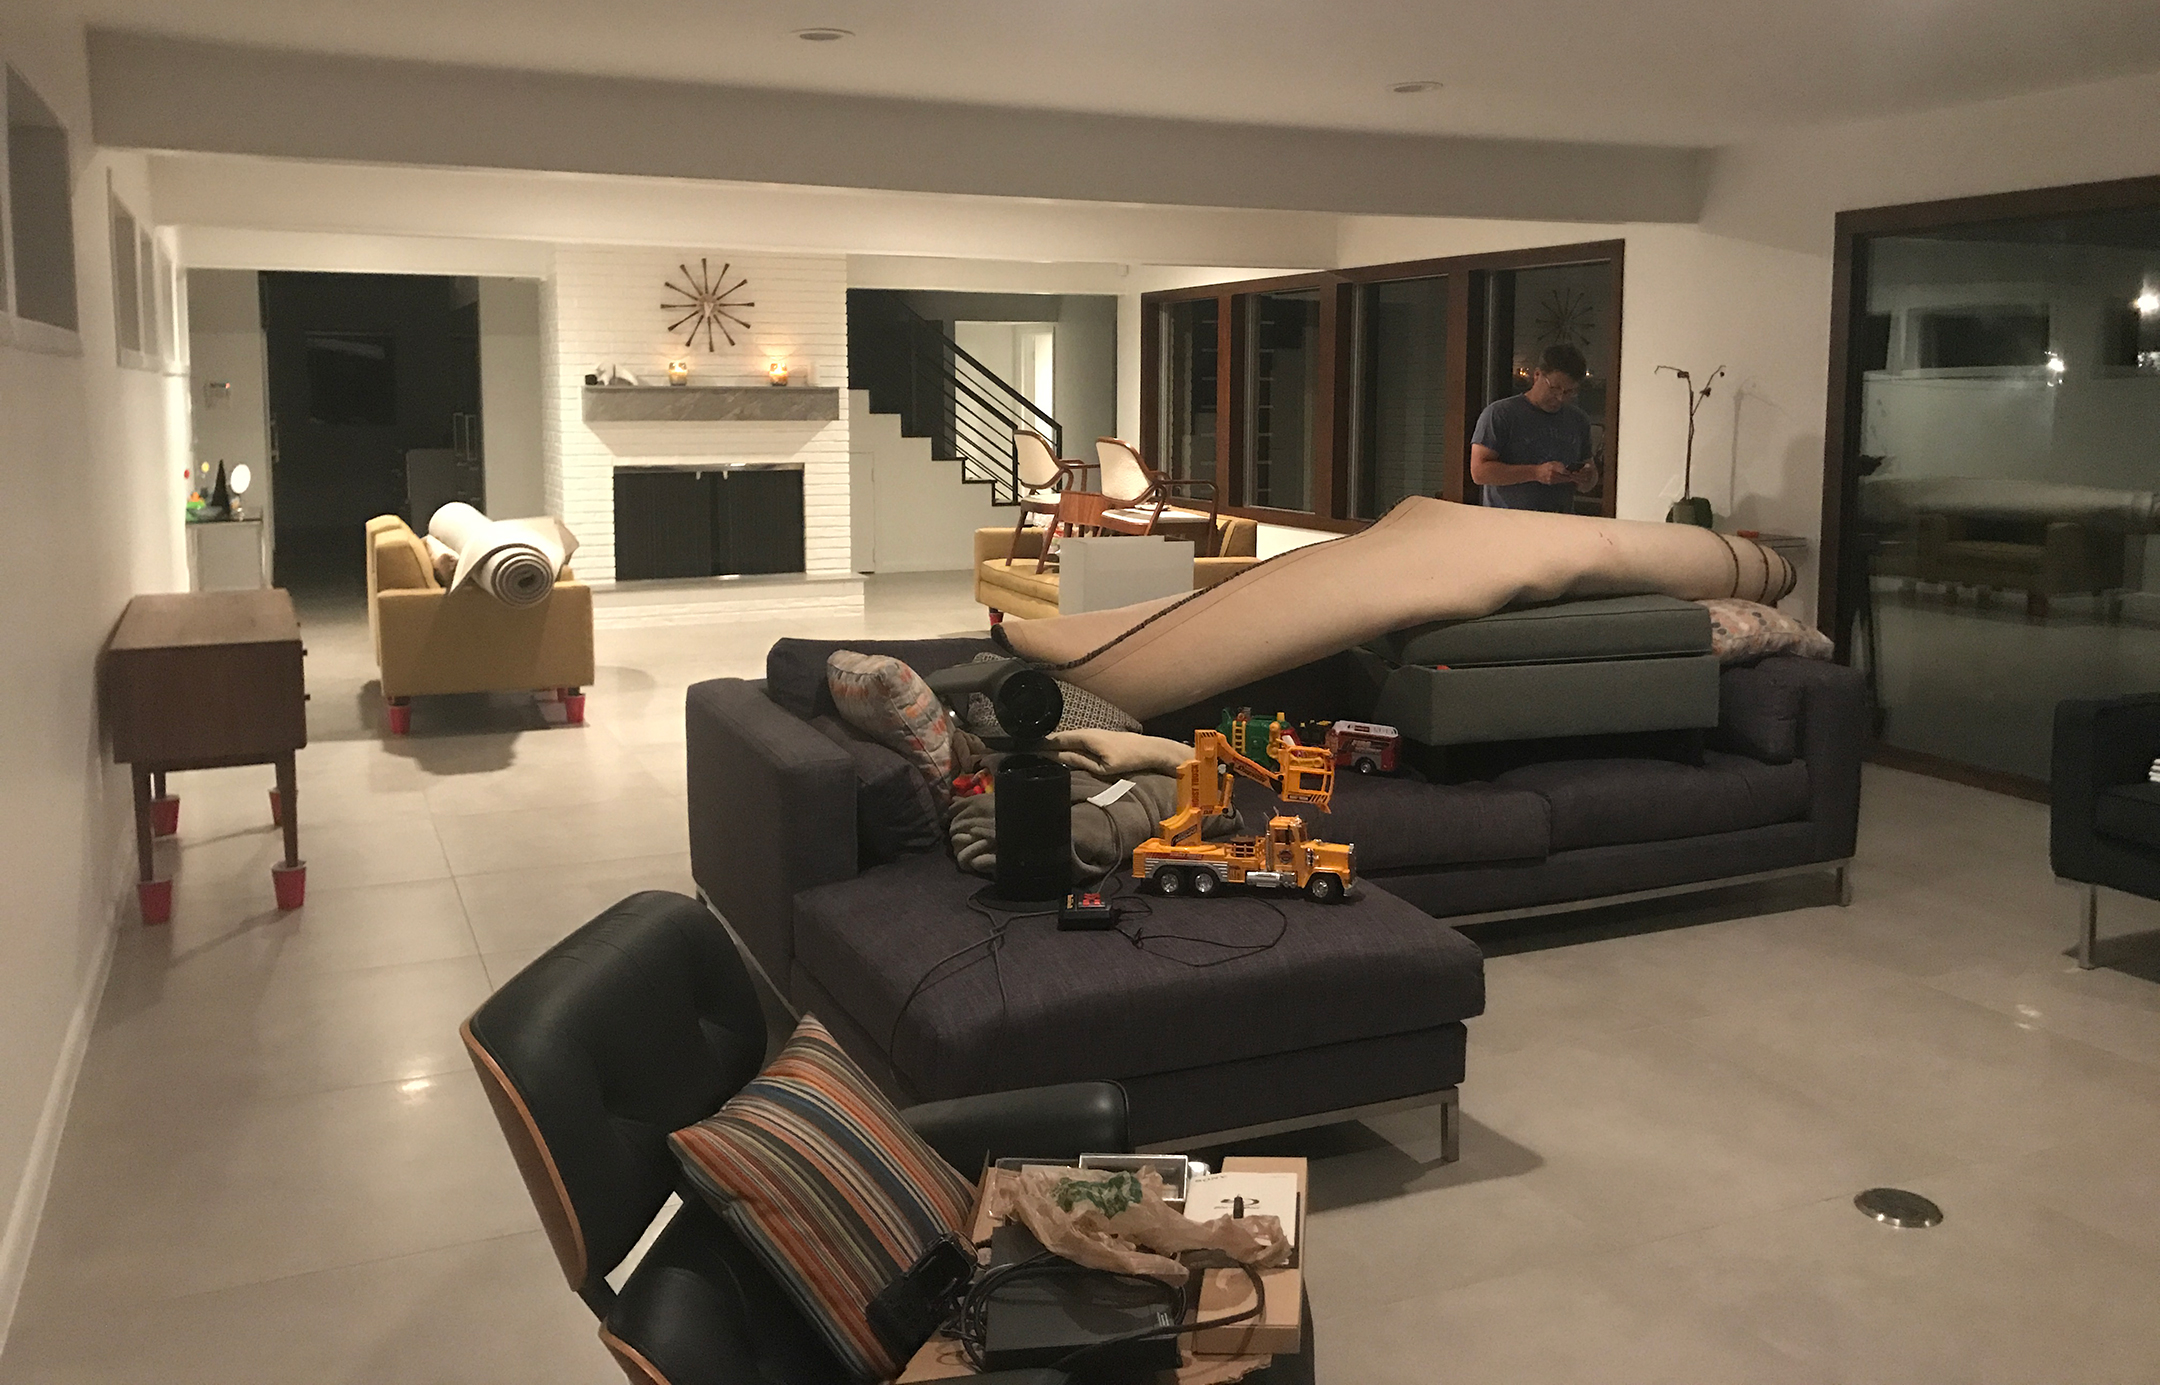 Photo of a living room with couches and chairs covered in elevated toys, furniture, and rugs